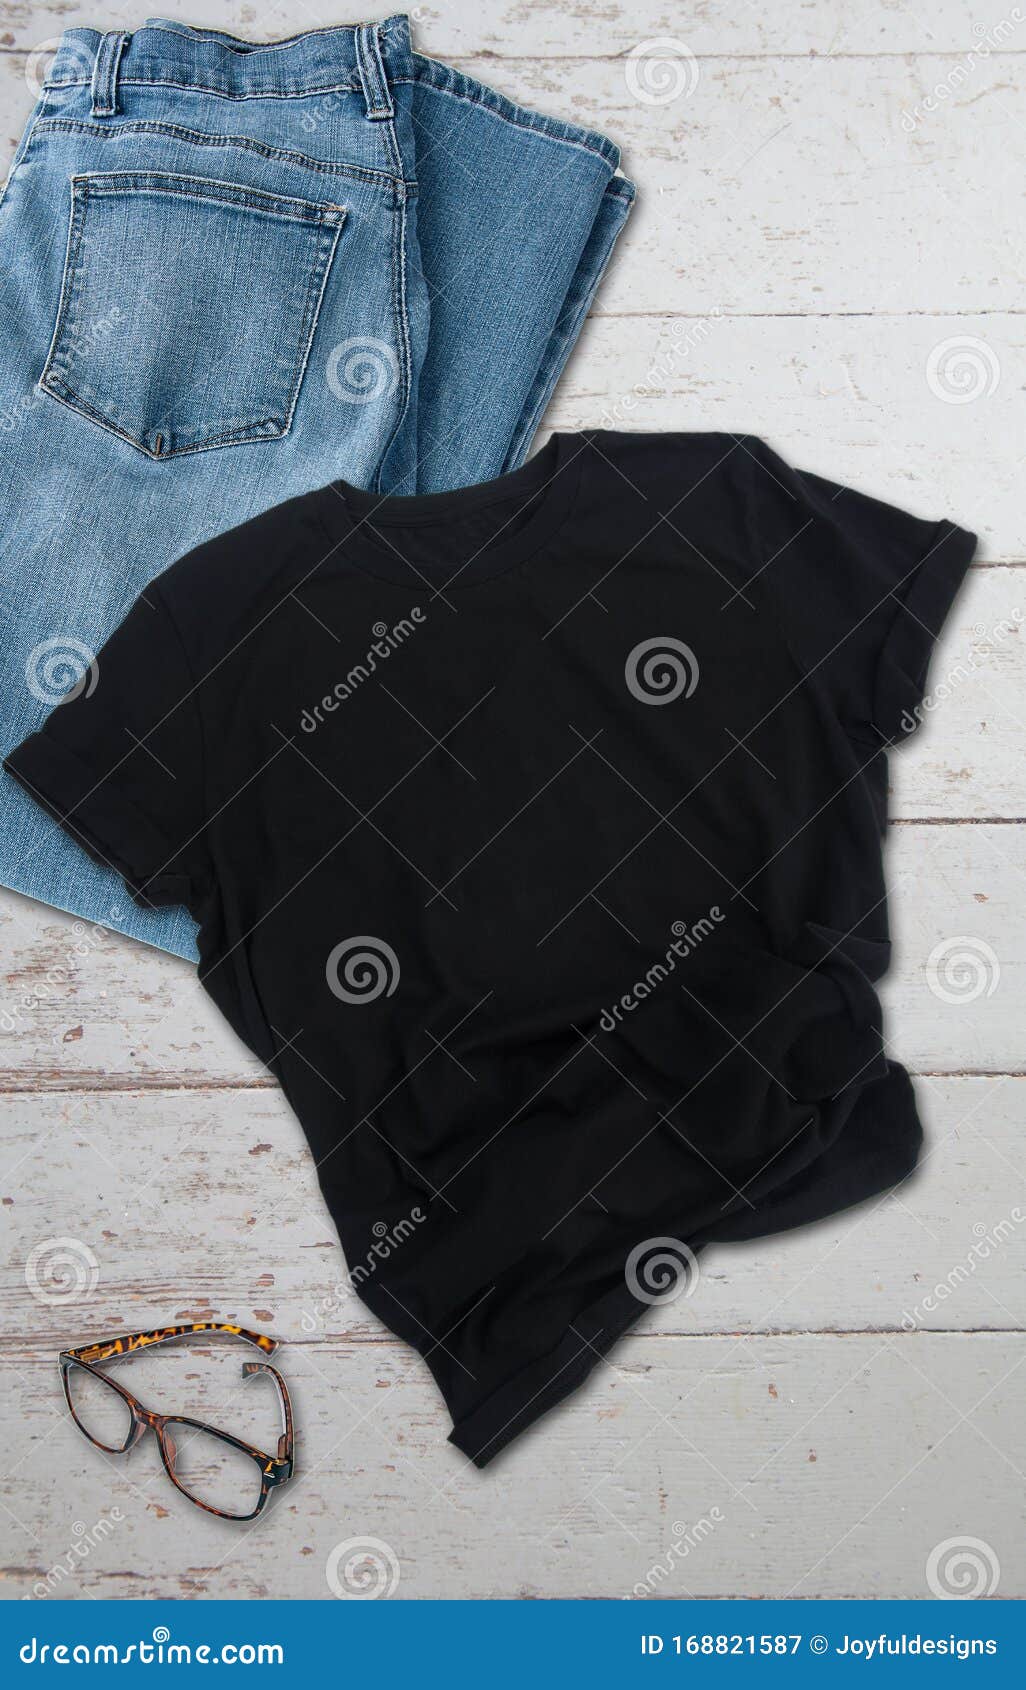 Download Black Tshirt Mockup With Jeans Styled Product Photo Stock ...